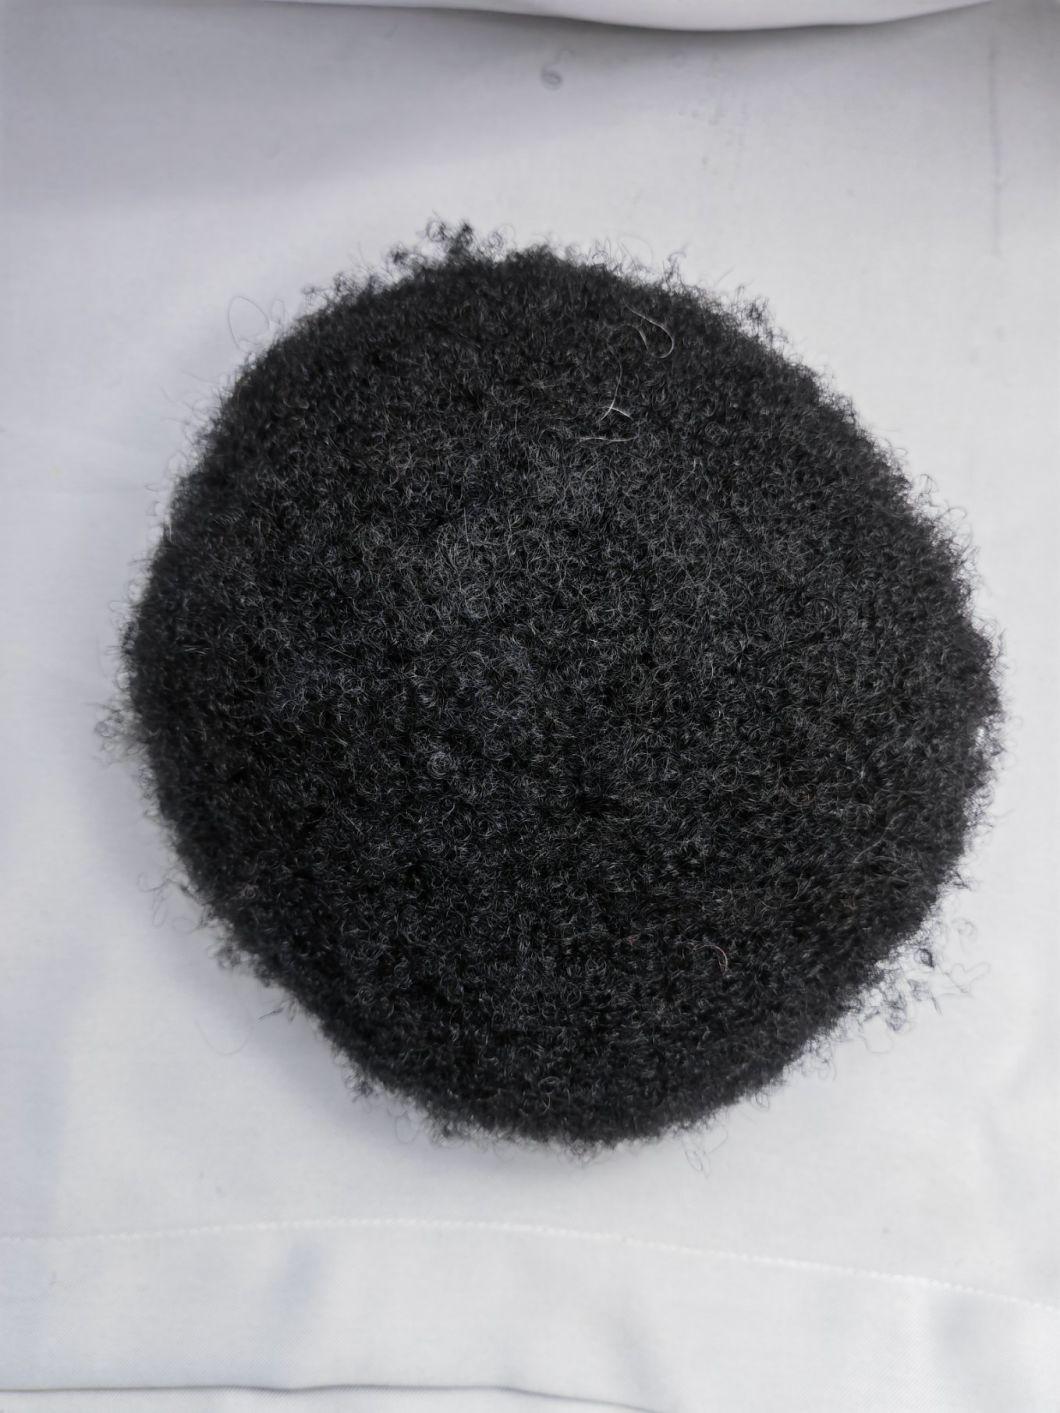 2022 Best Custom Made Natural Fine Mono Base Human Hair Toupee Made of Remy Human Hair